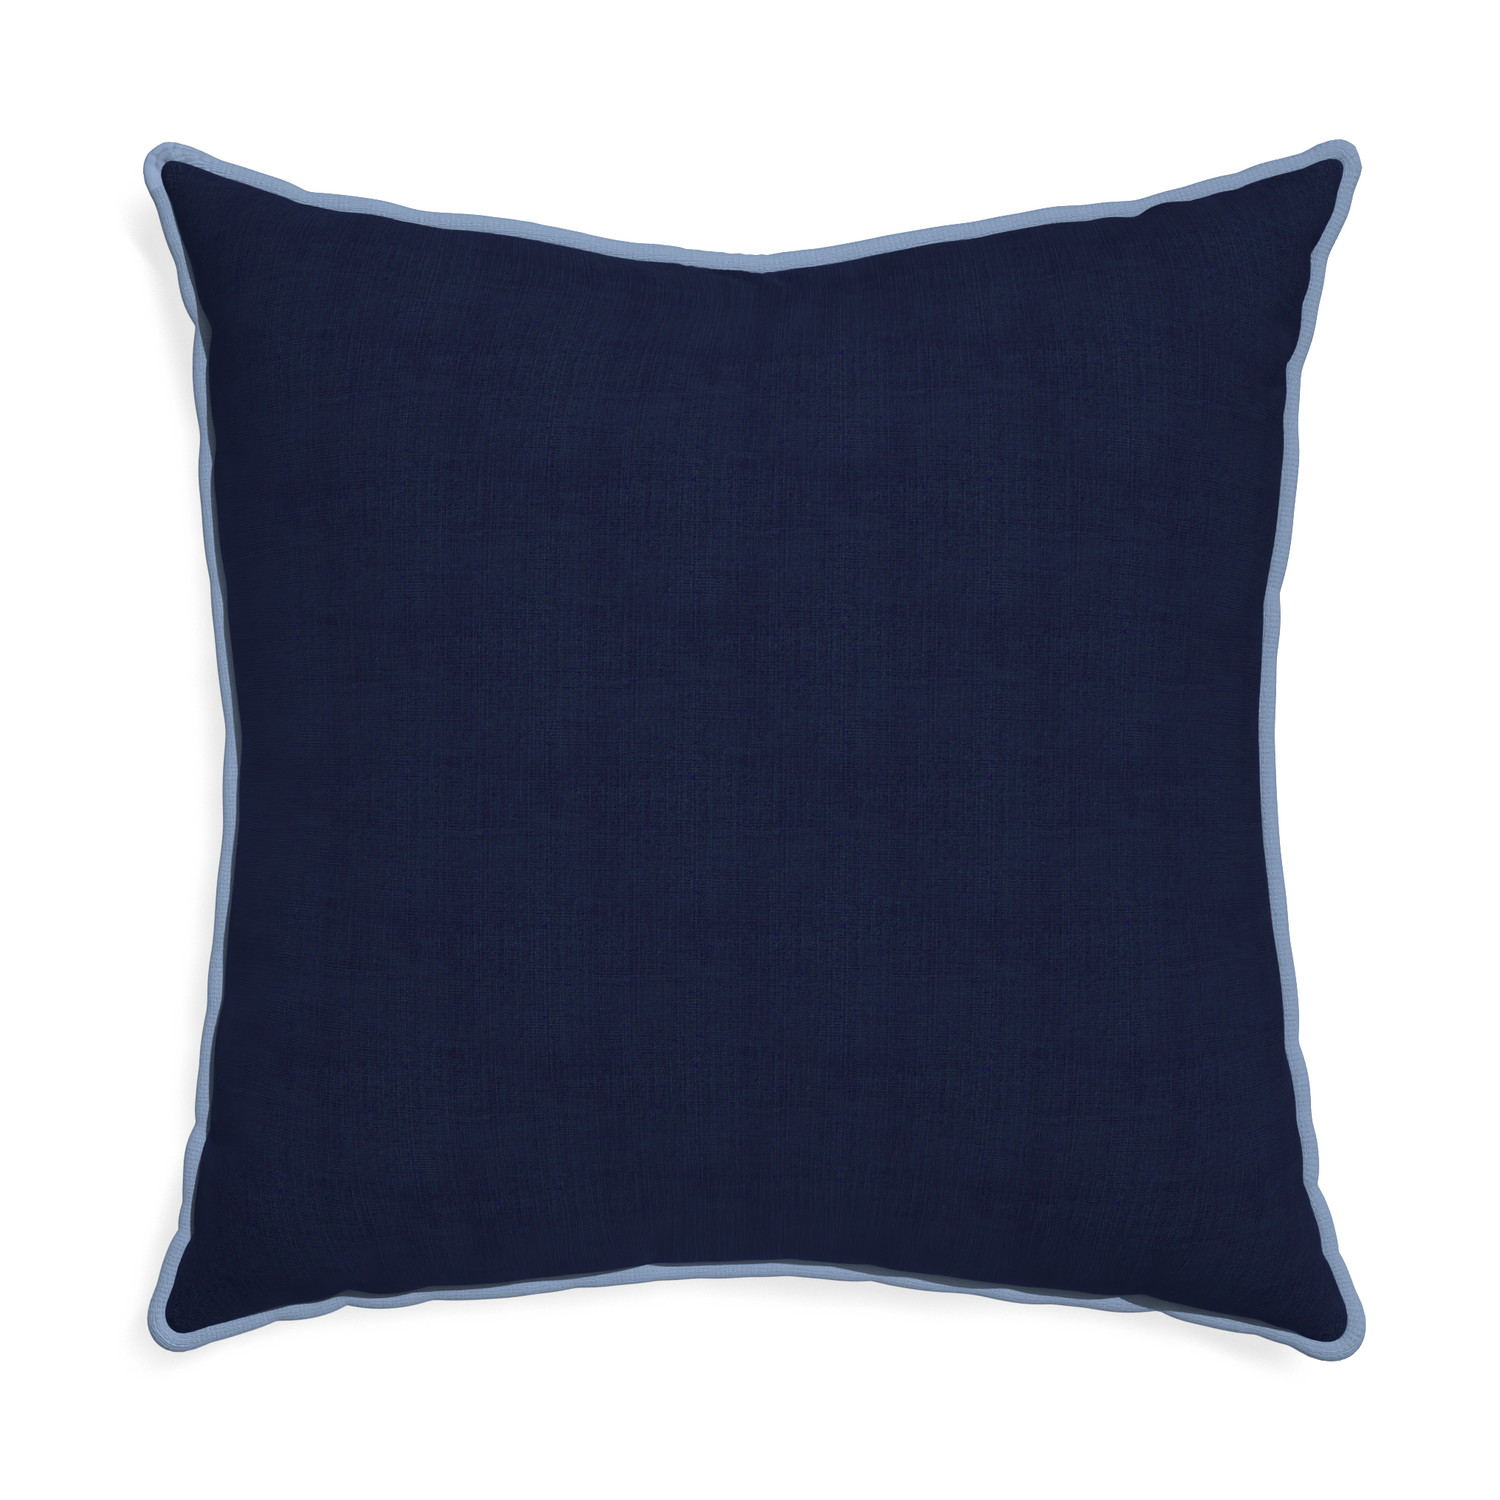 Euro-sham midnight custom navy bluepillow with sky piping on white background